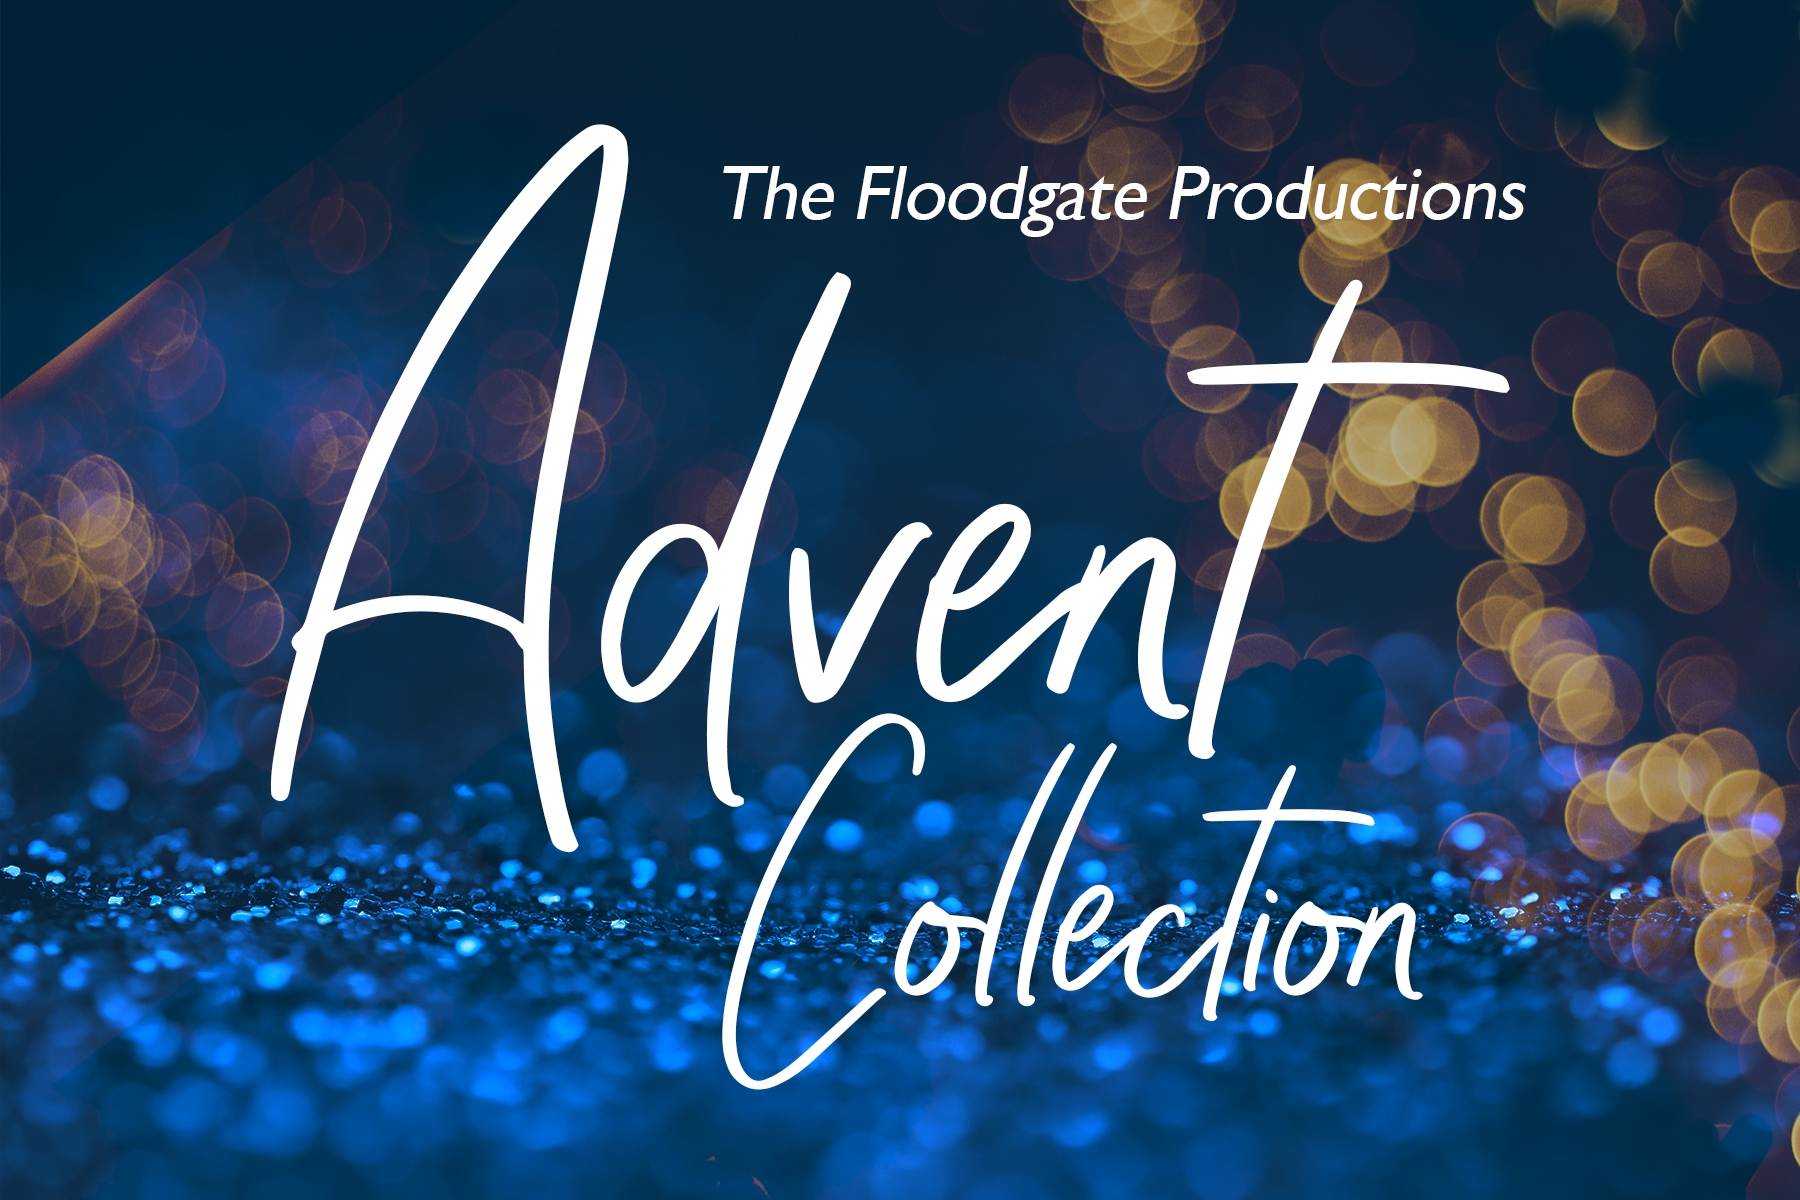 Advent Collection